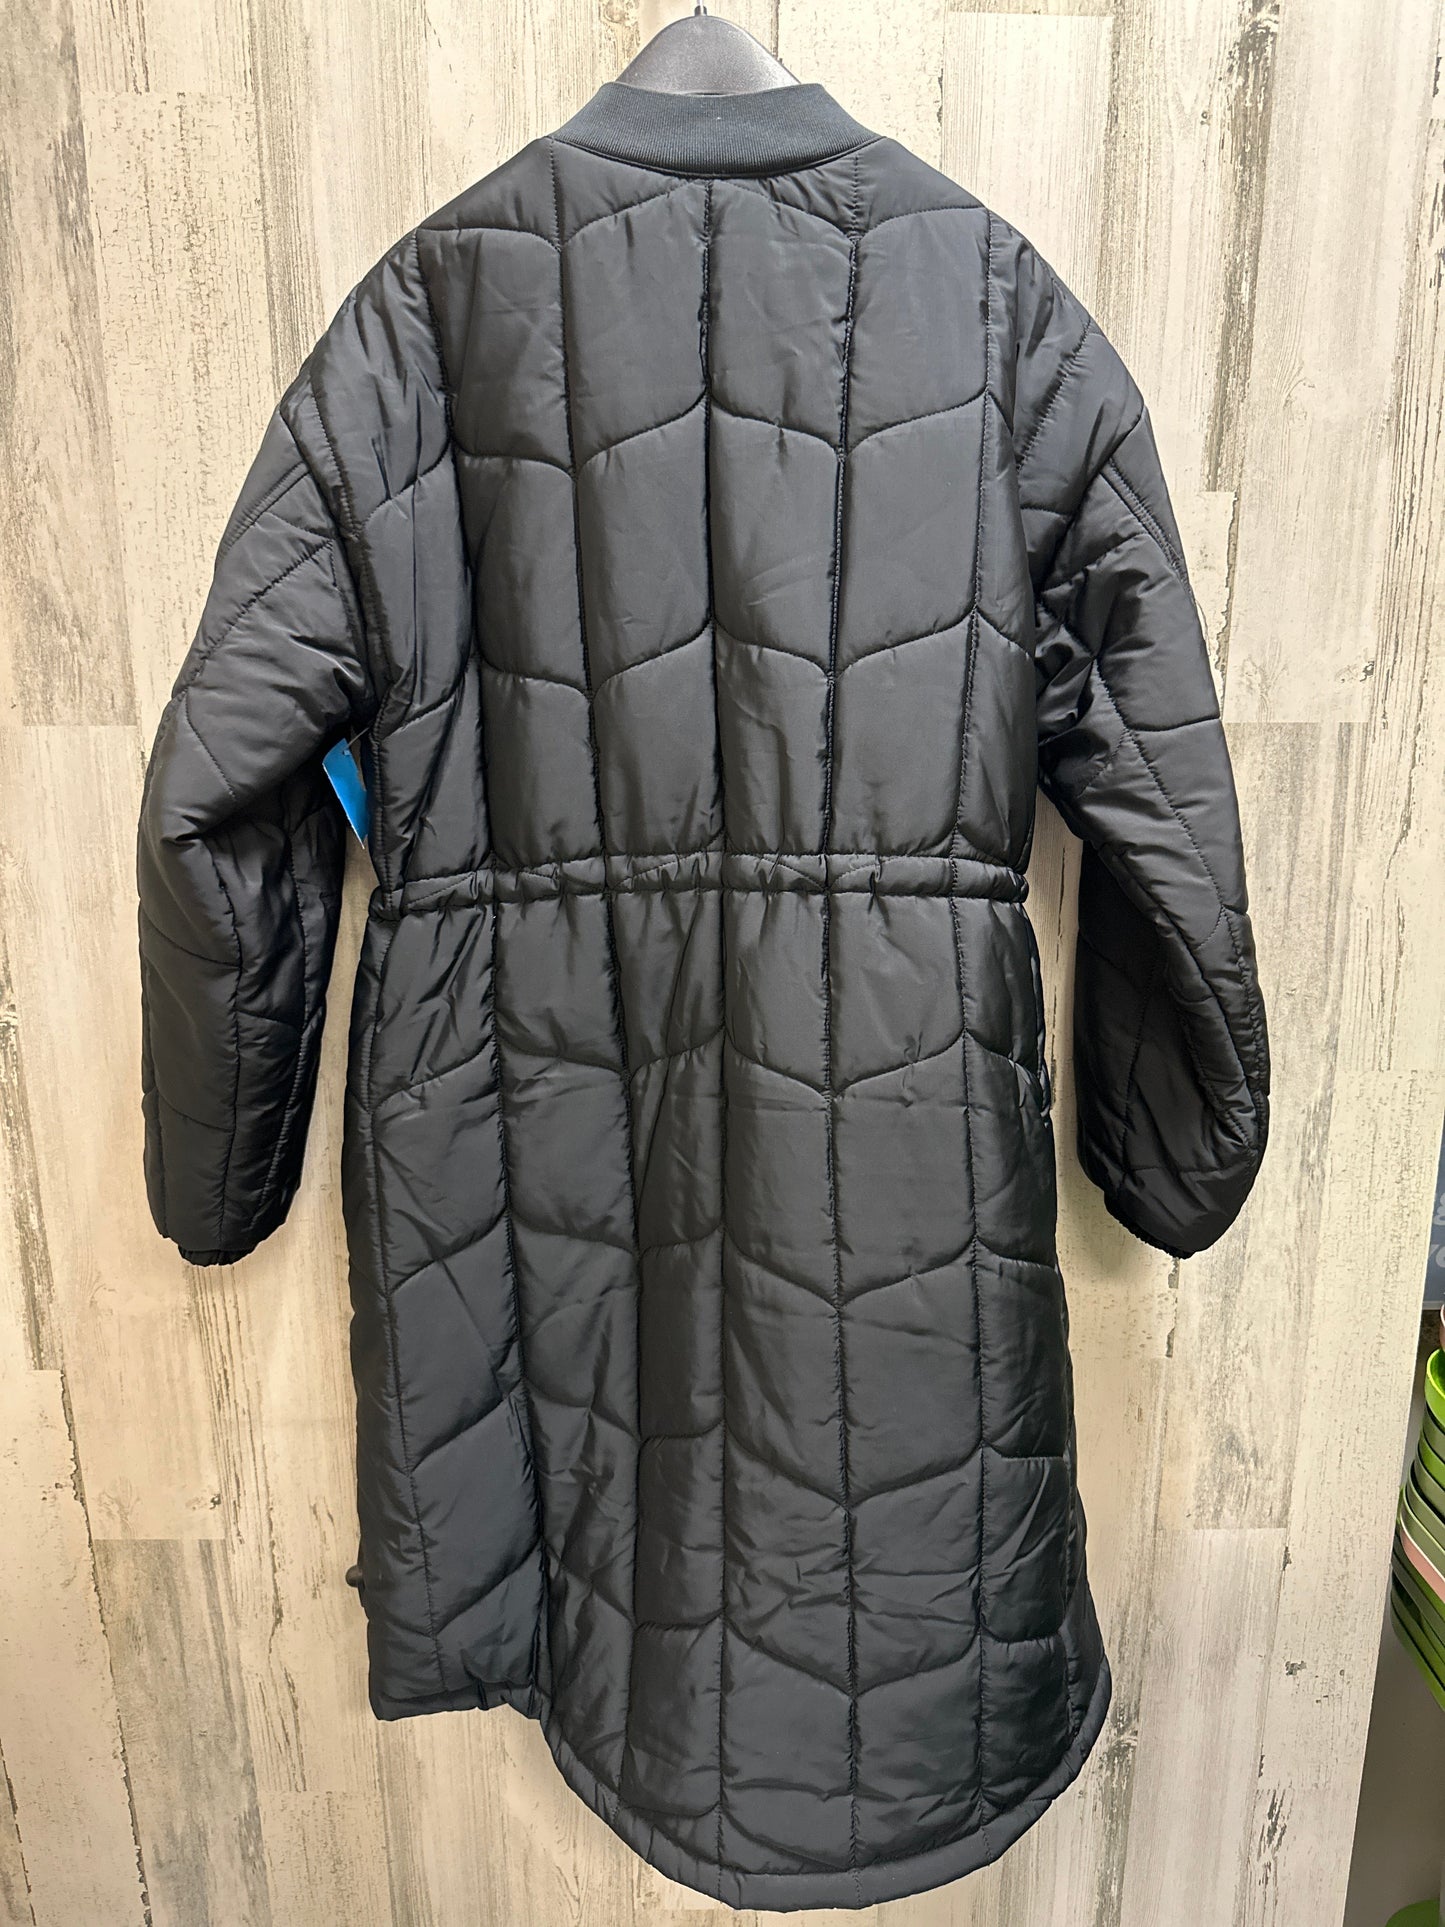 Coat Other By Amazon Essentials  Size: L